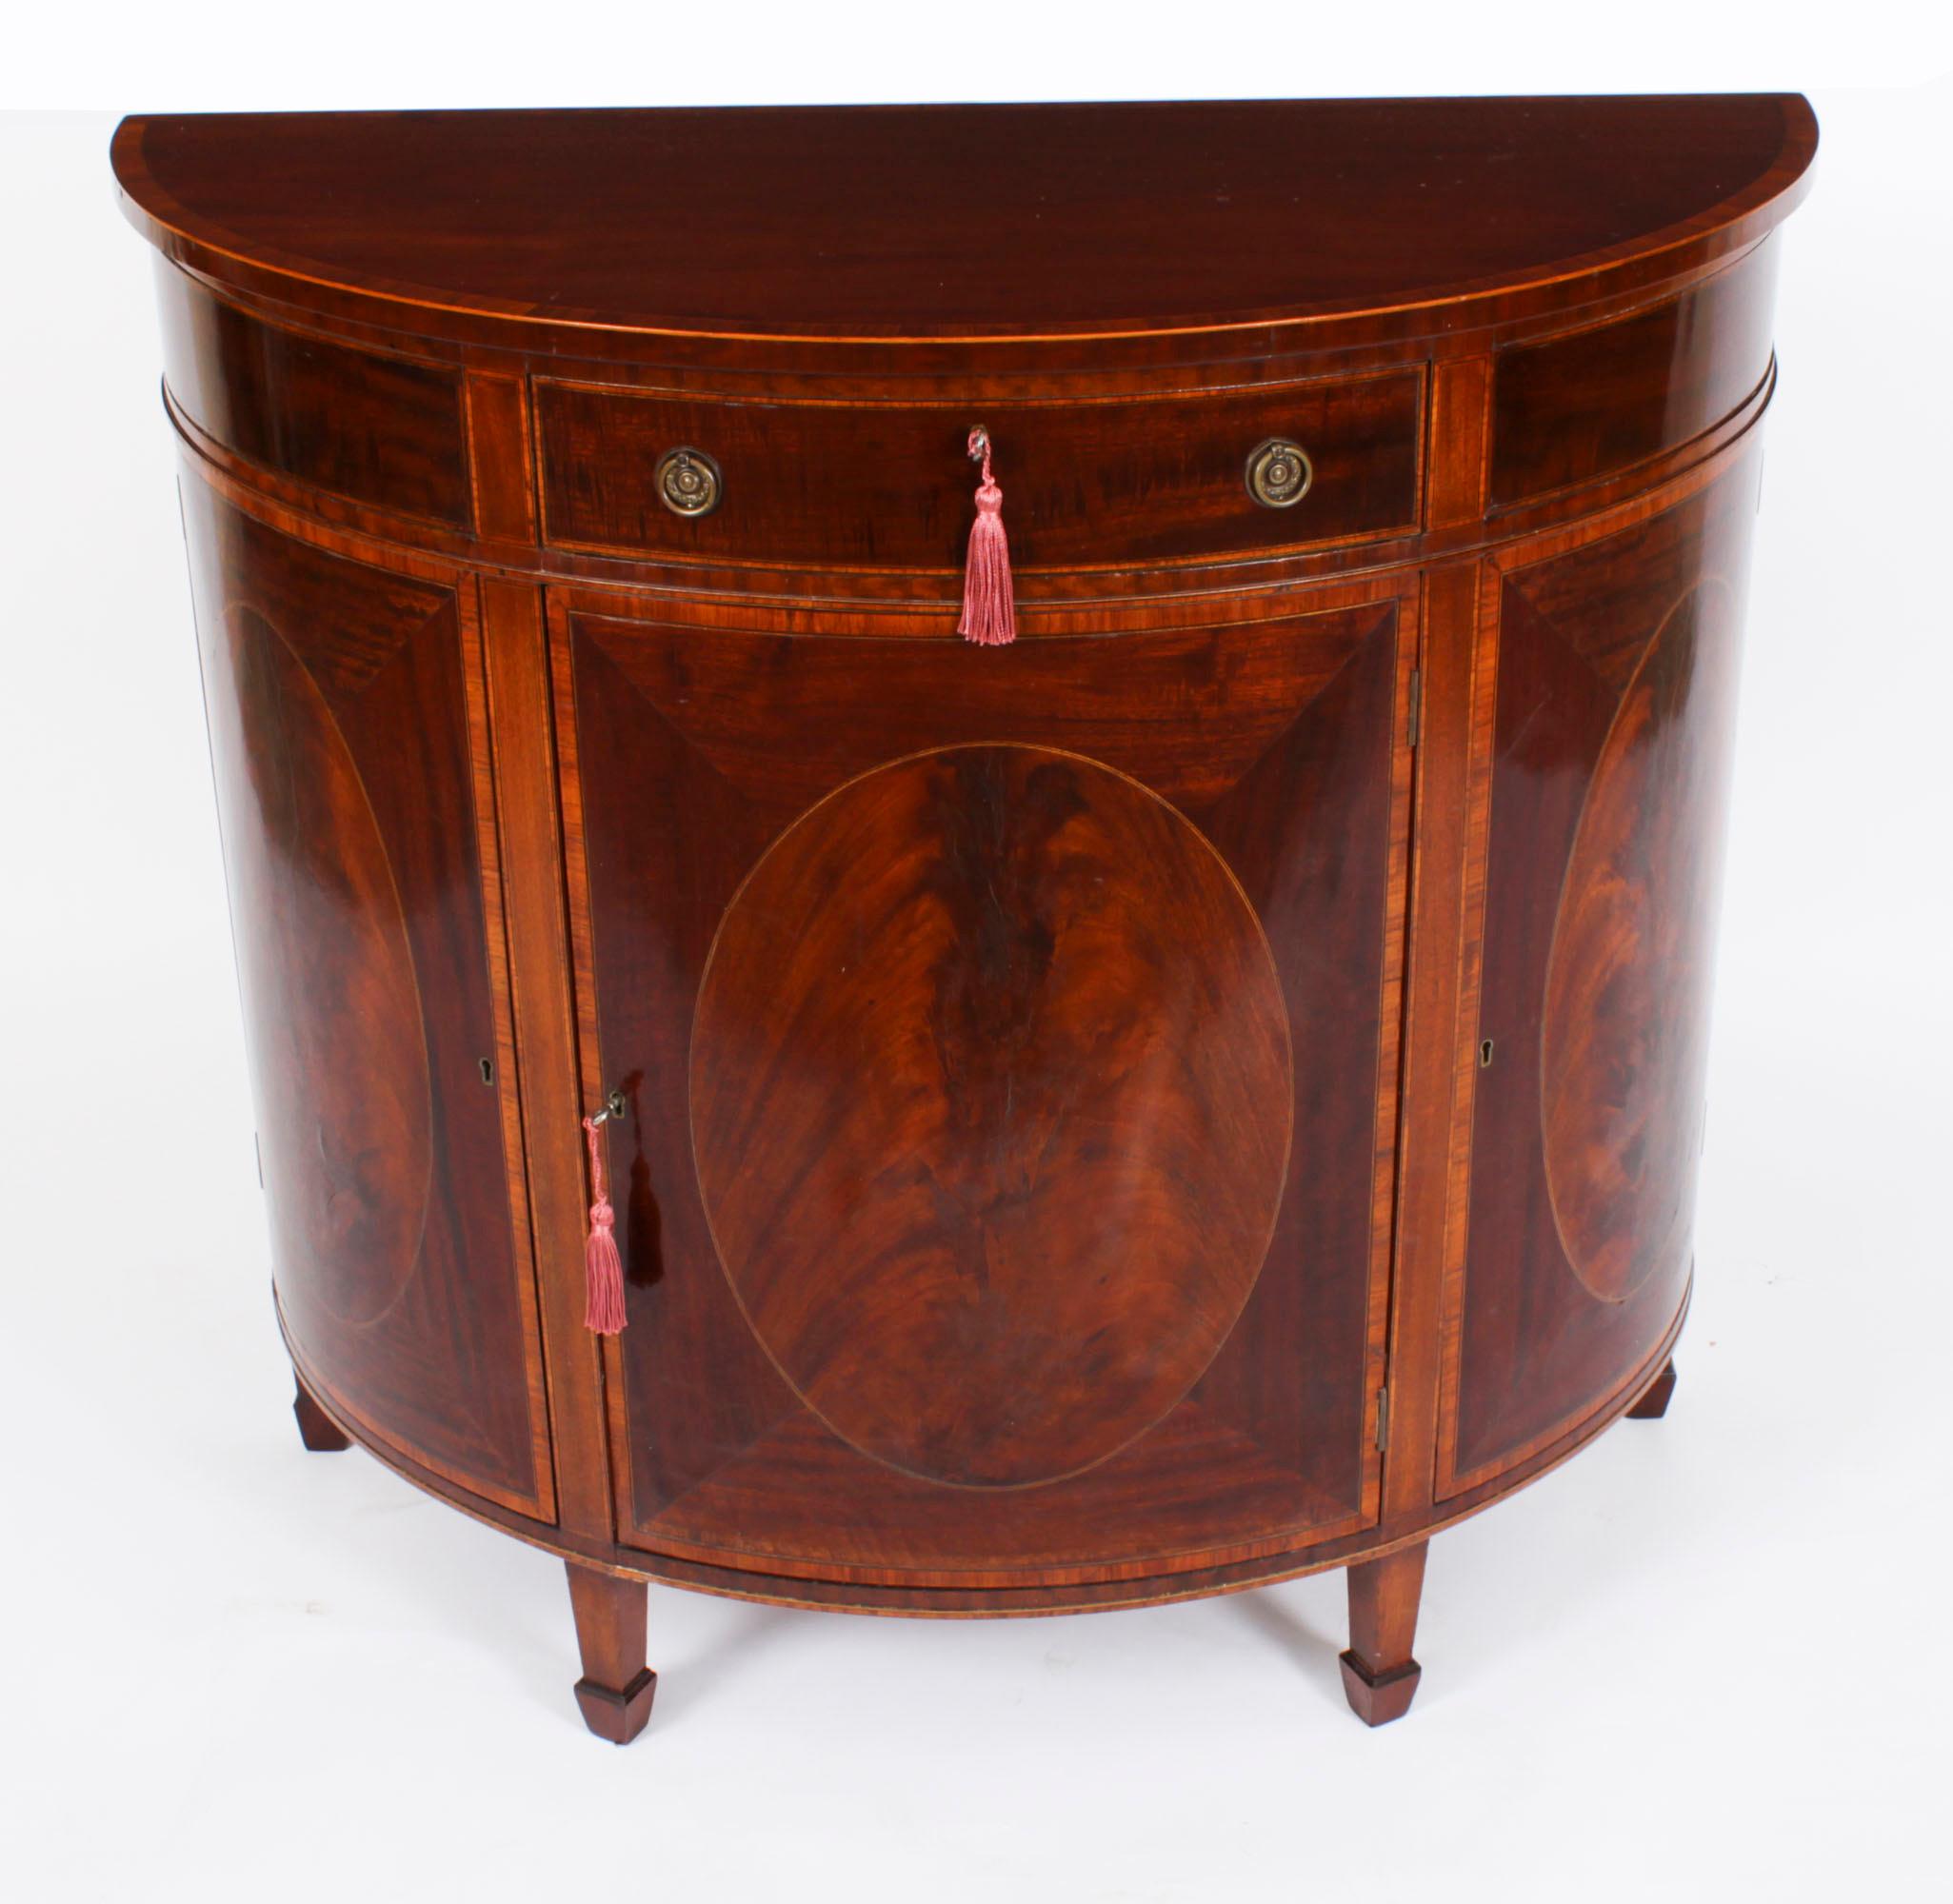 This is a superb antique George III Revival demilune flame mahogany bowfront side cabinet, circa 1880 in date.

The half moon top is beautifully crossbanded in satin wood above a capacious central drawer in the frieze. There are three cupboard doors